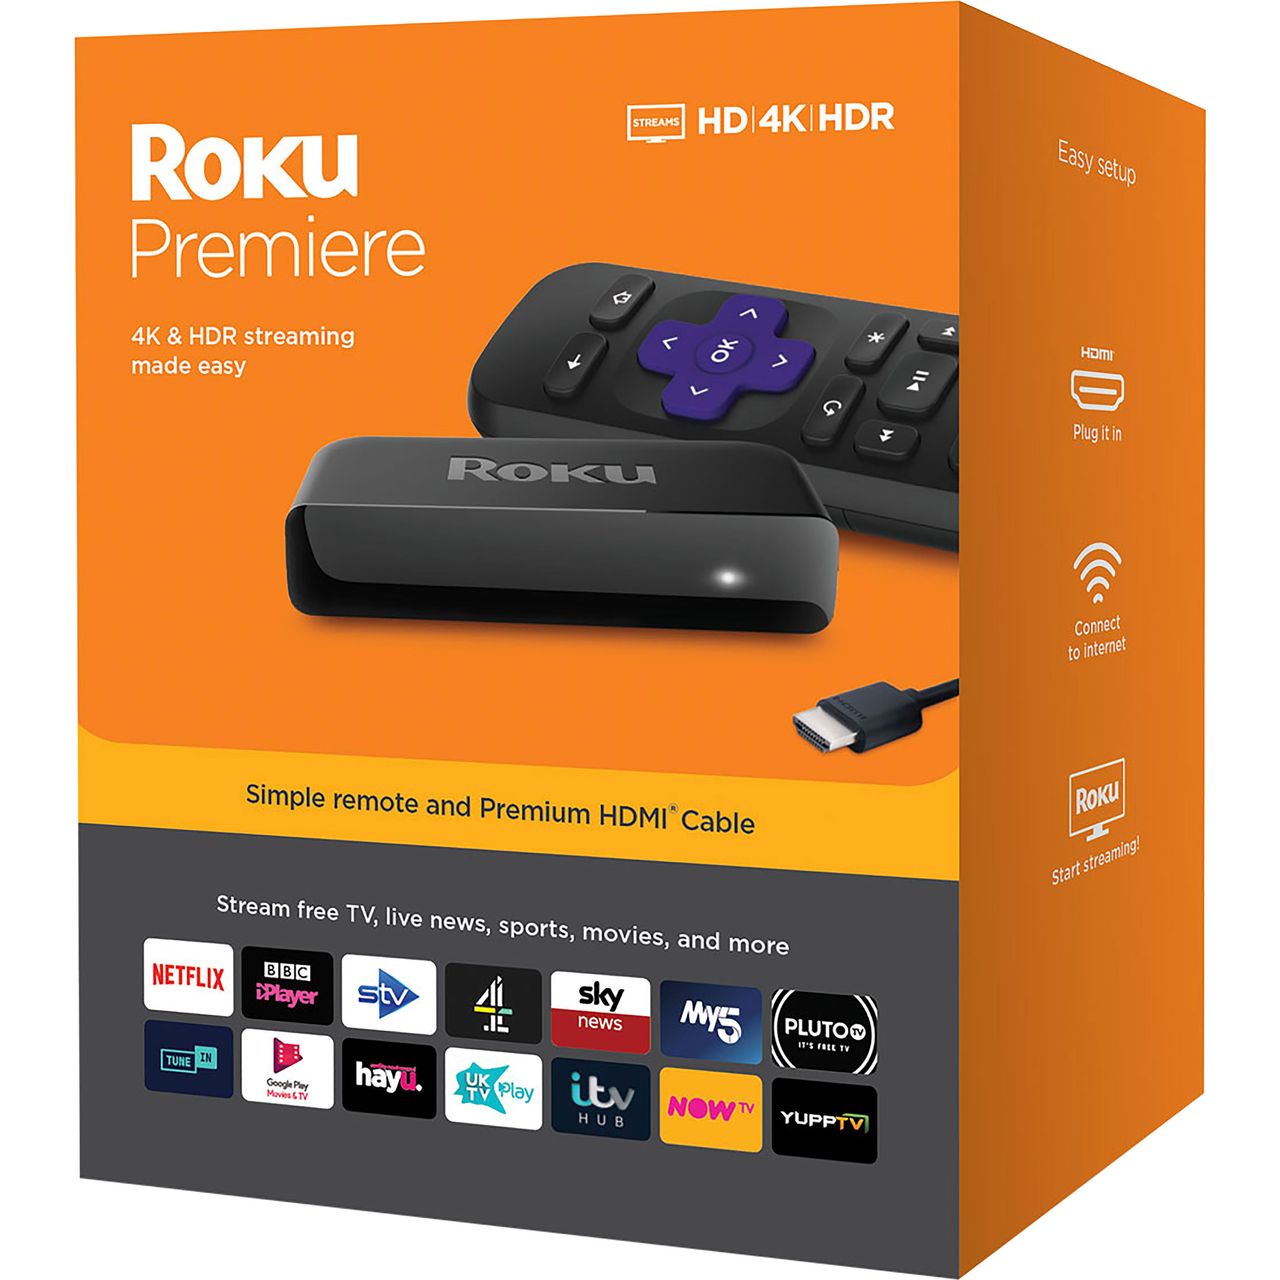 Roku Premiere Streaming Player Review